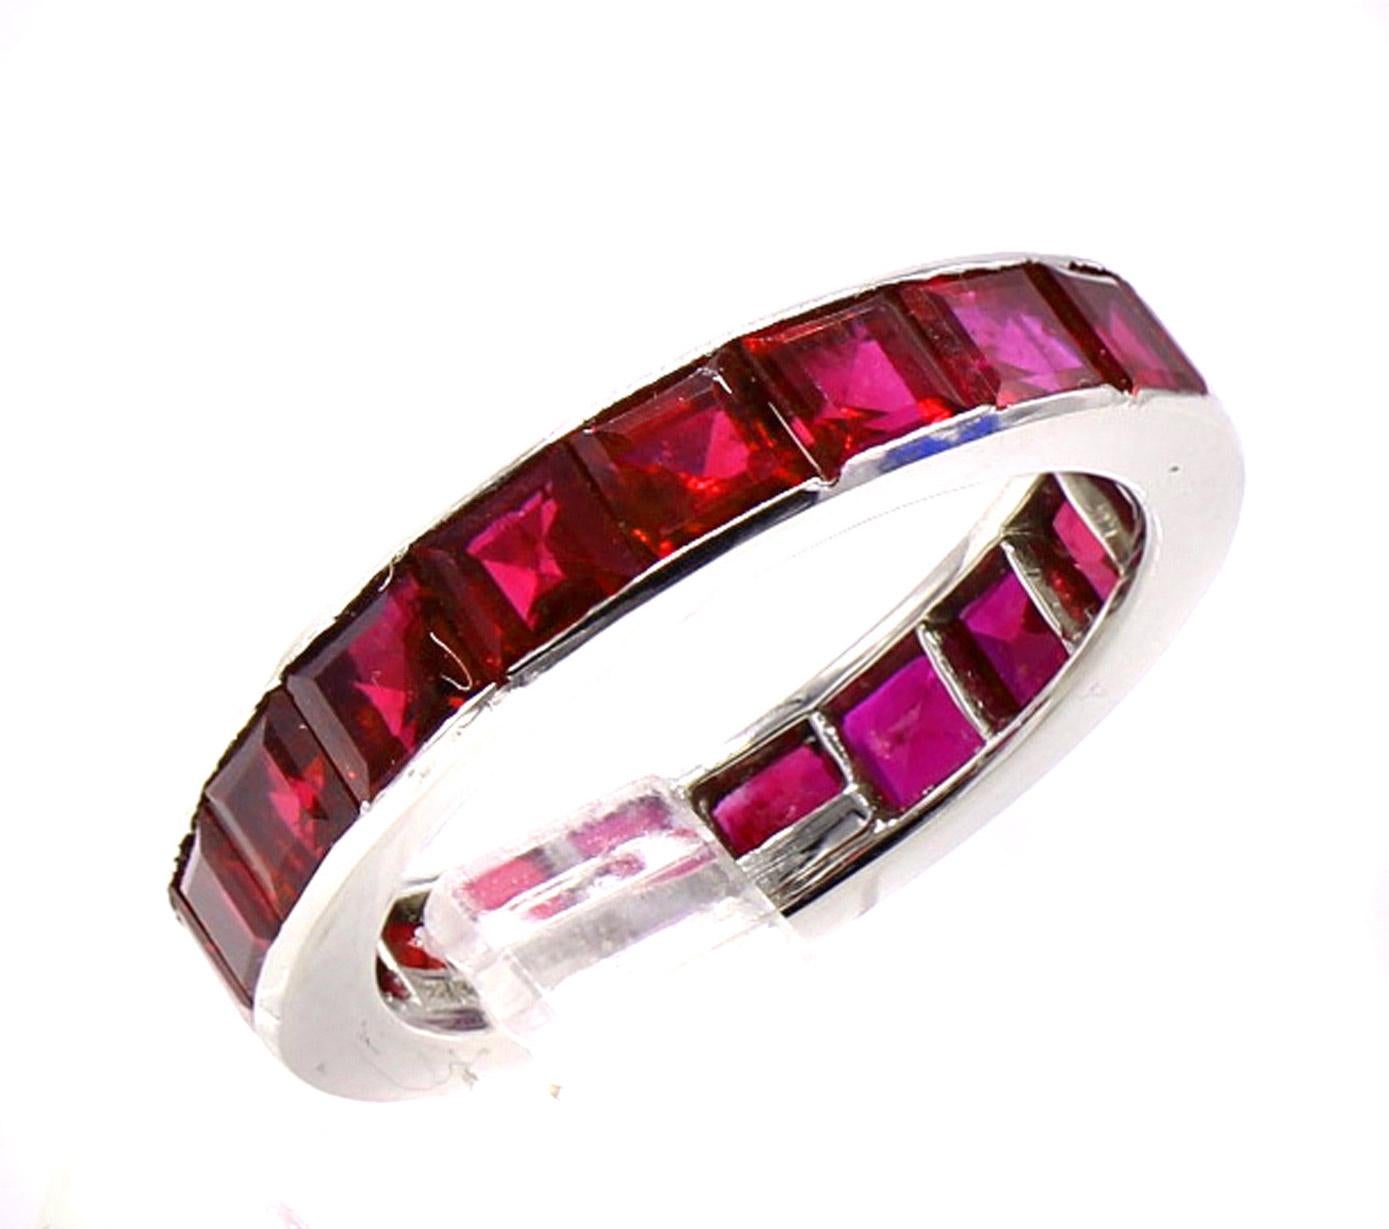 Rare and magnificent platinum eternity band handcrafted by Tiffany & Co. set with 19 perfectly matched step-cut Burma rubies. The rubies display an intensely saturated  